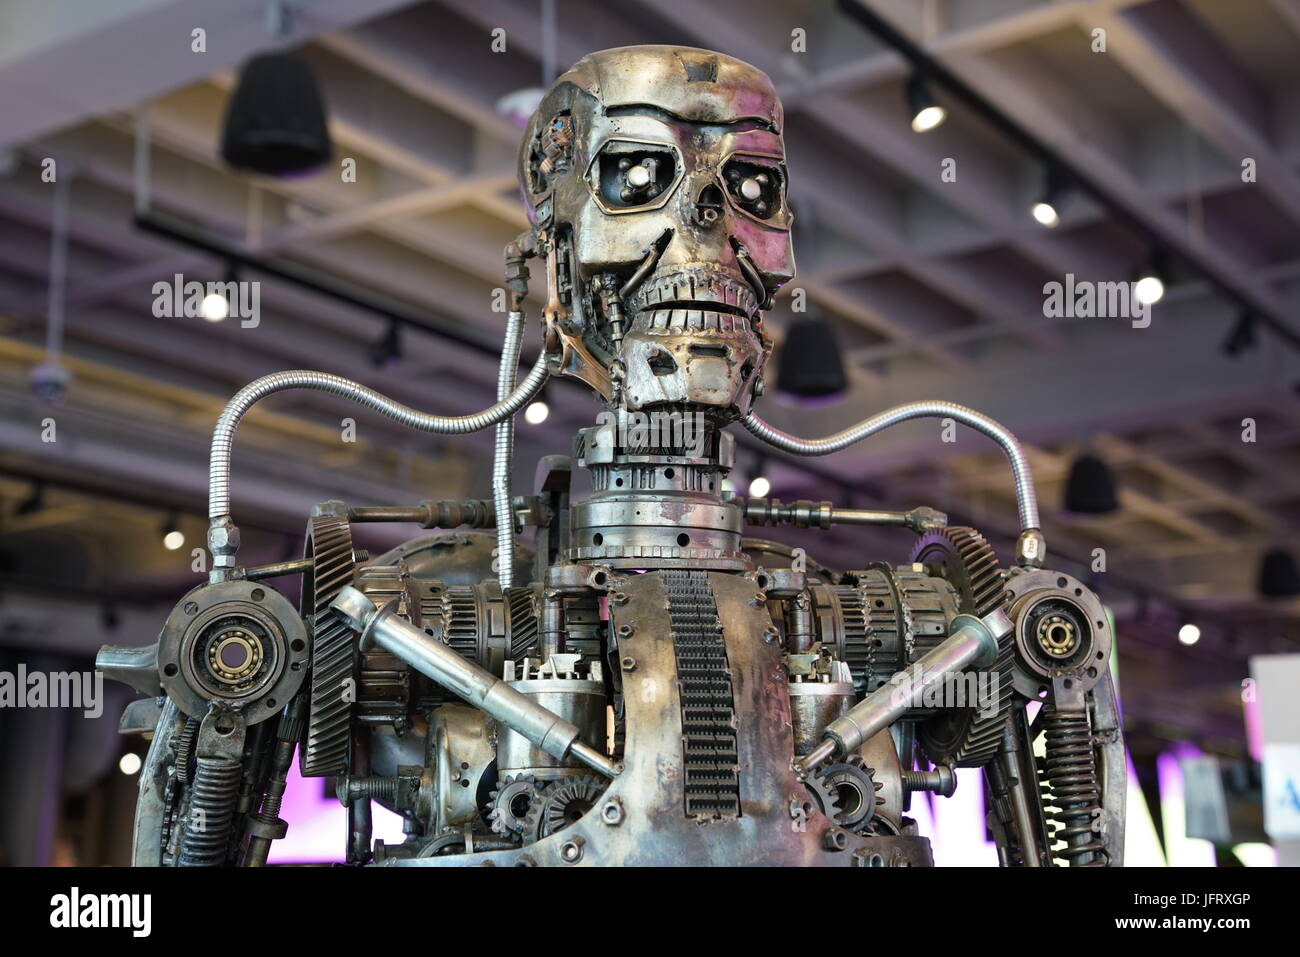 T 800 Terminator High Resolution Stock Photography and Images - Alamy